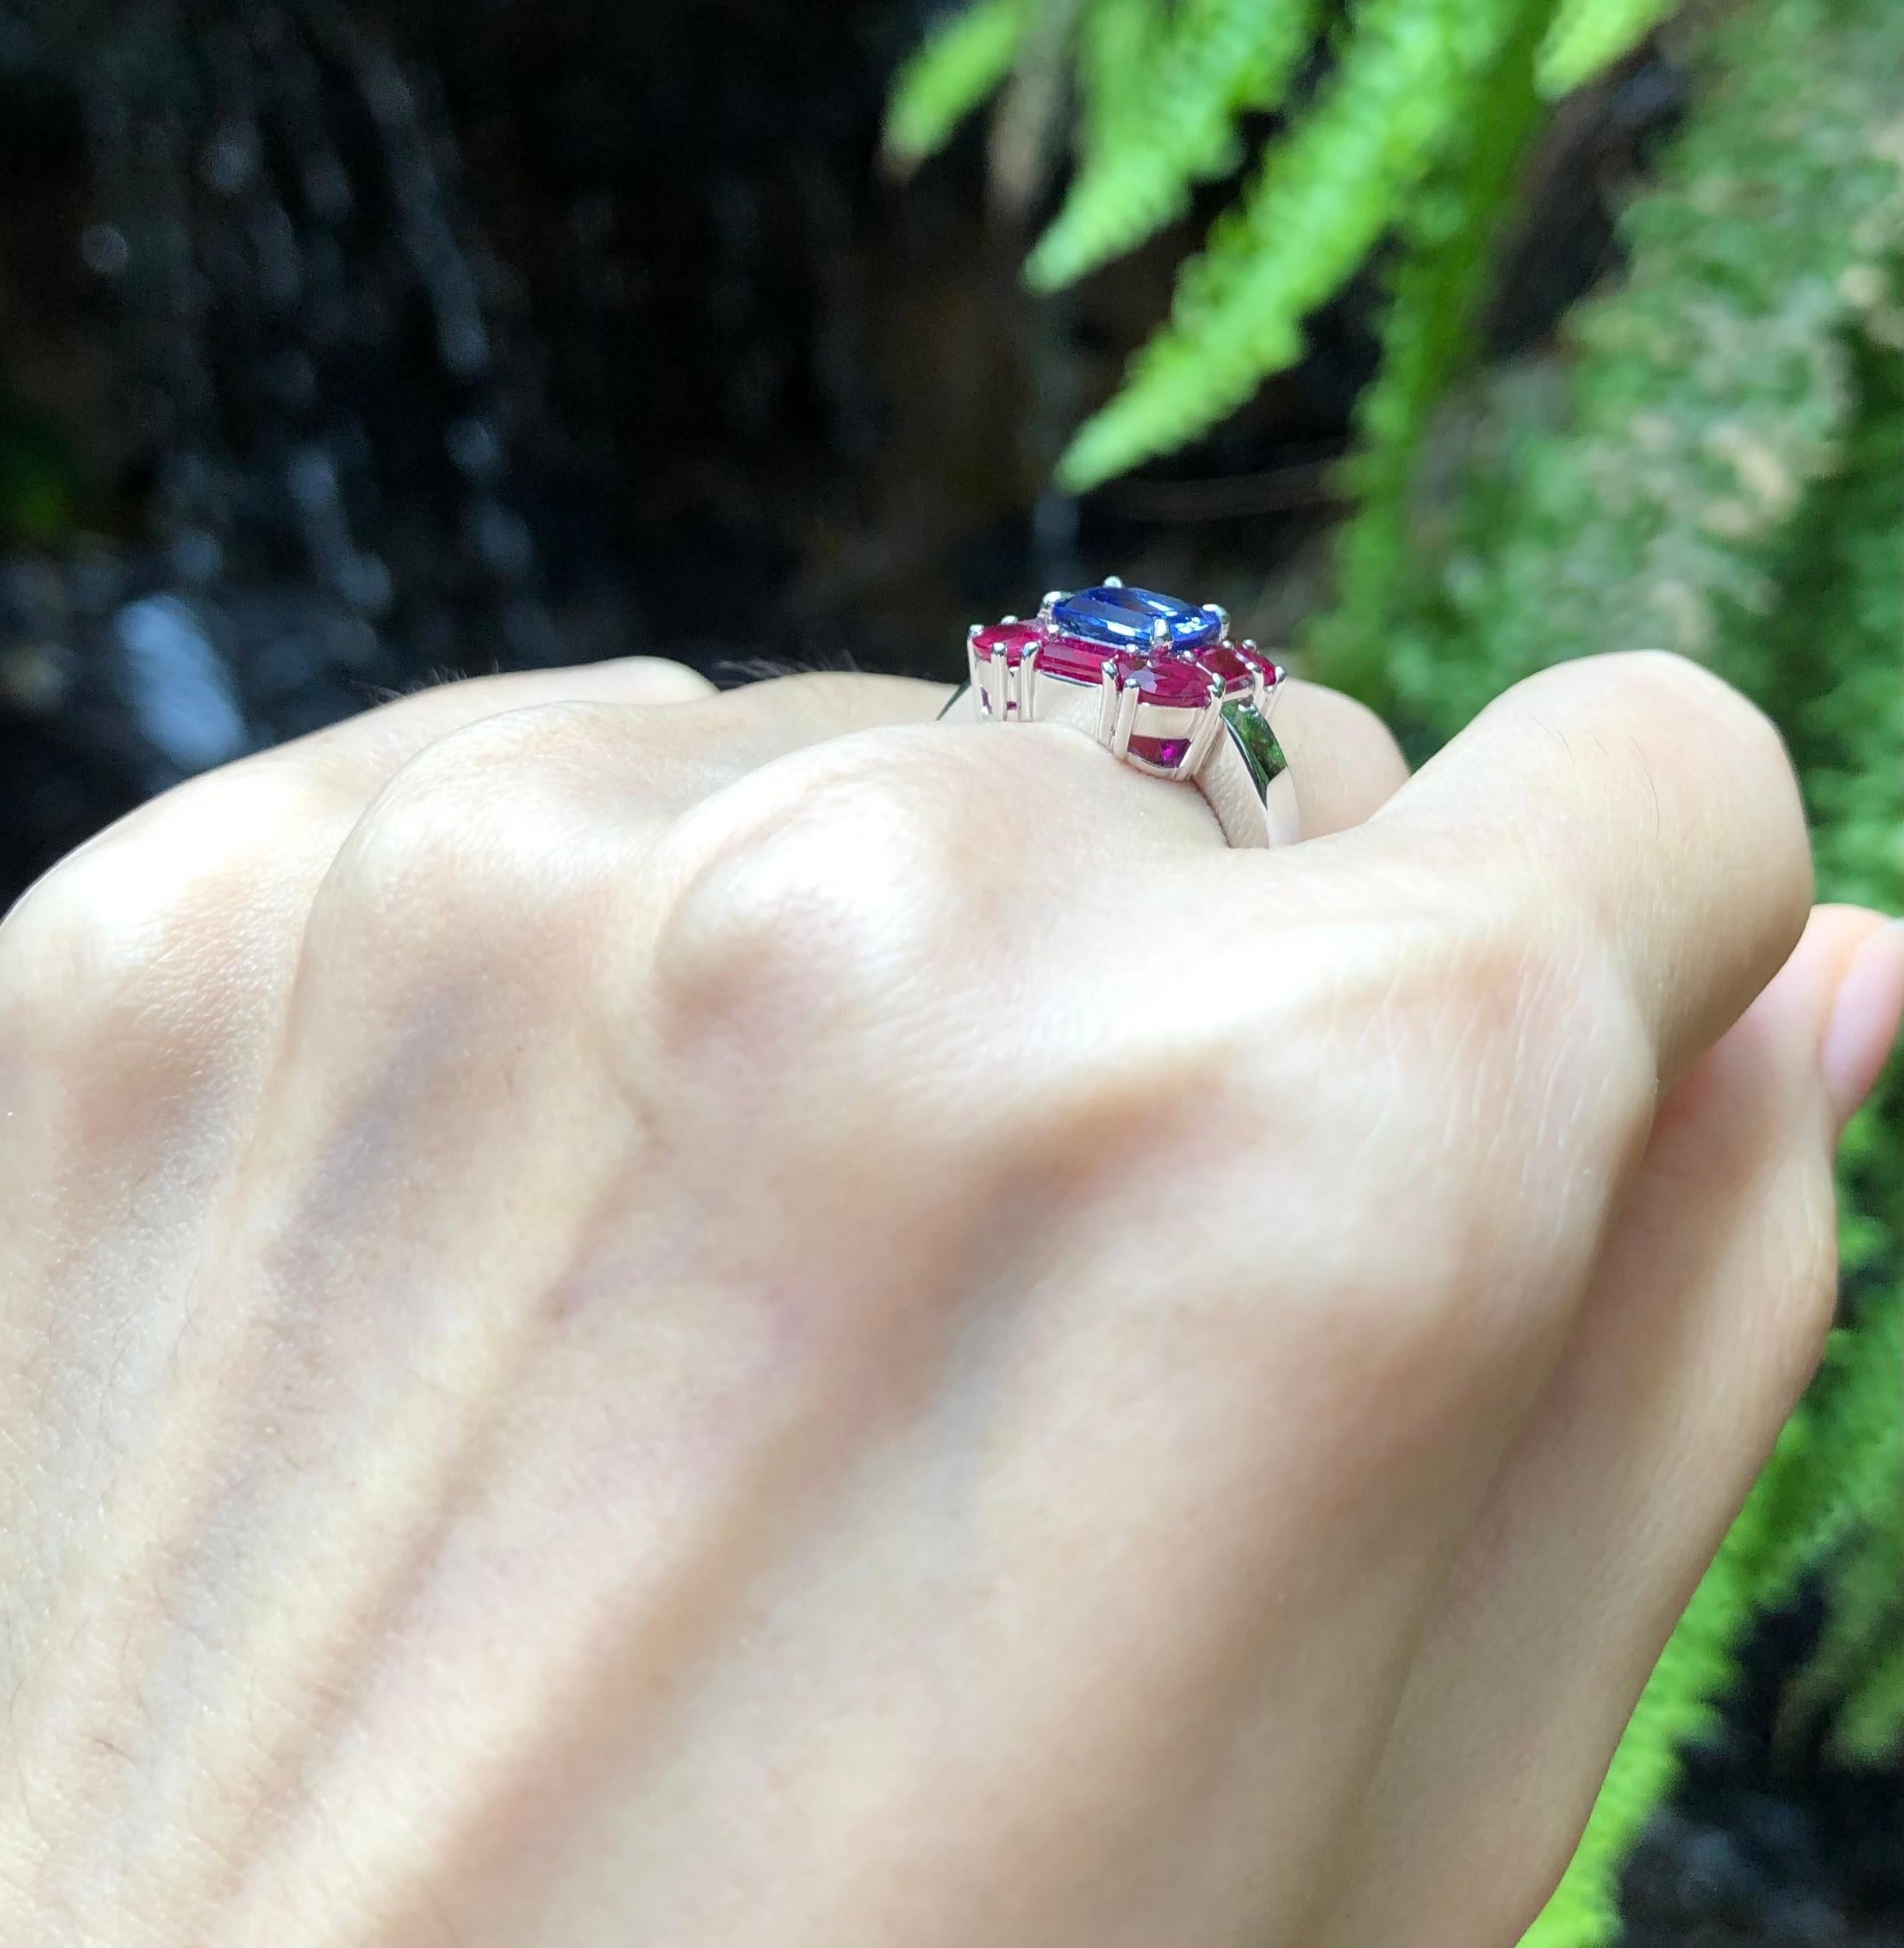 Tanzanite 1.38 carats with Ruby 2.5 carats Ring set in 18 Karat White Gold Settings

Width:  1.2 cm 
Length: 1.2 cm
Ring Size: 51
Total Weight: 7.96 grams

